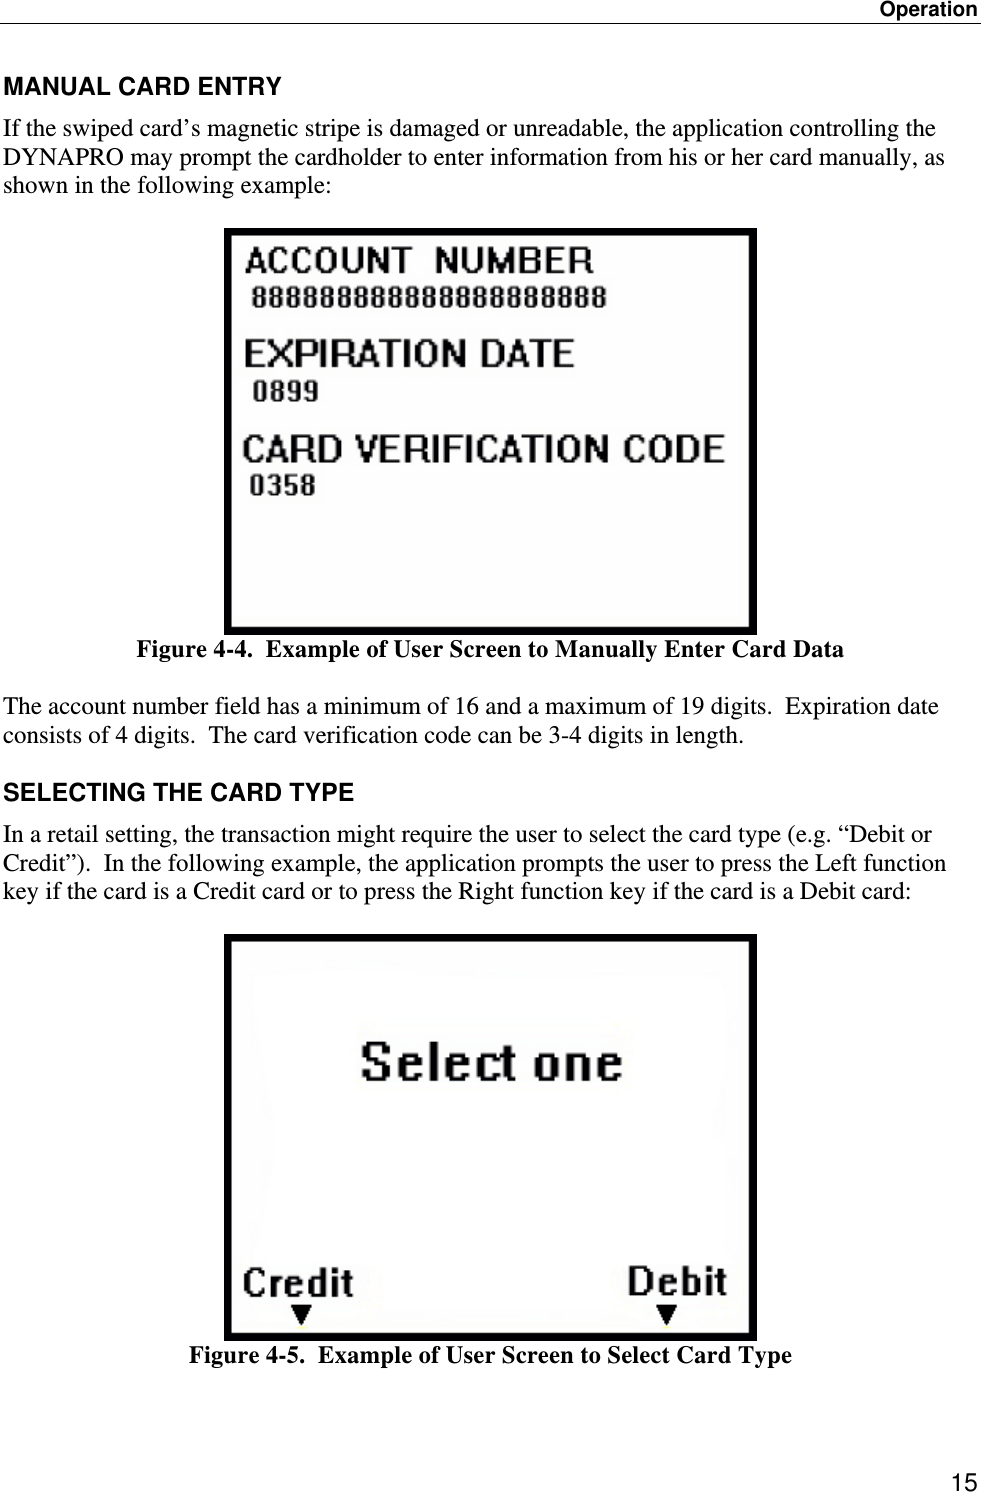 Operation 15 MANUAL CARD ENTRY If the swiped card’s magnetic stripe is damaged or unreadable, the application controlling the DYNAPRO may prompt the cardholder to enter information from his or her card manually, as shown in the following example:   Figure 4-4.  Example of User Screen to Manually Enter Card Data  The account number field has a minimum of 16 and a maximum of 19 digits.  Expiration date consists of 4 digits.  The card verification code can be 3-4 digits in length.  SELECTING THE CARD TYPE In a retail setting, the transaction might require the user to select the card type (e.g. “Debit or Credit”).  In the following example, the application prompts the user to press the Left function key if the card is a Credit card or to press the Right function key if the card is a Debit card:   Figure 4-5.  Example of User Screen to Select Card Type  